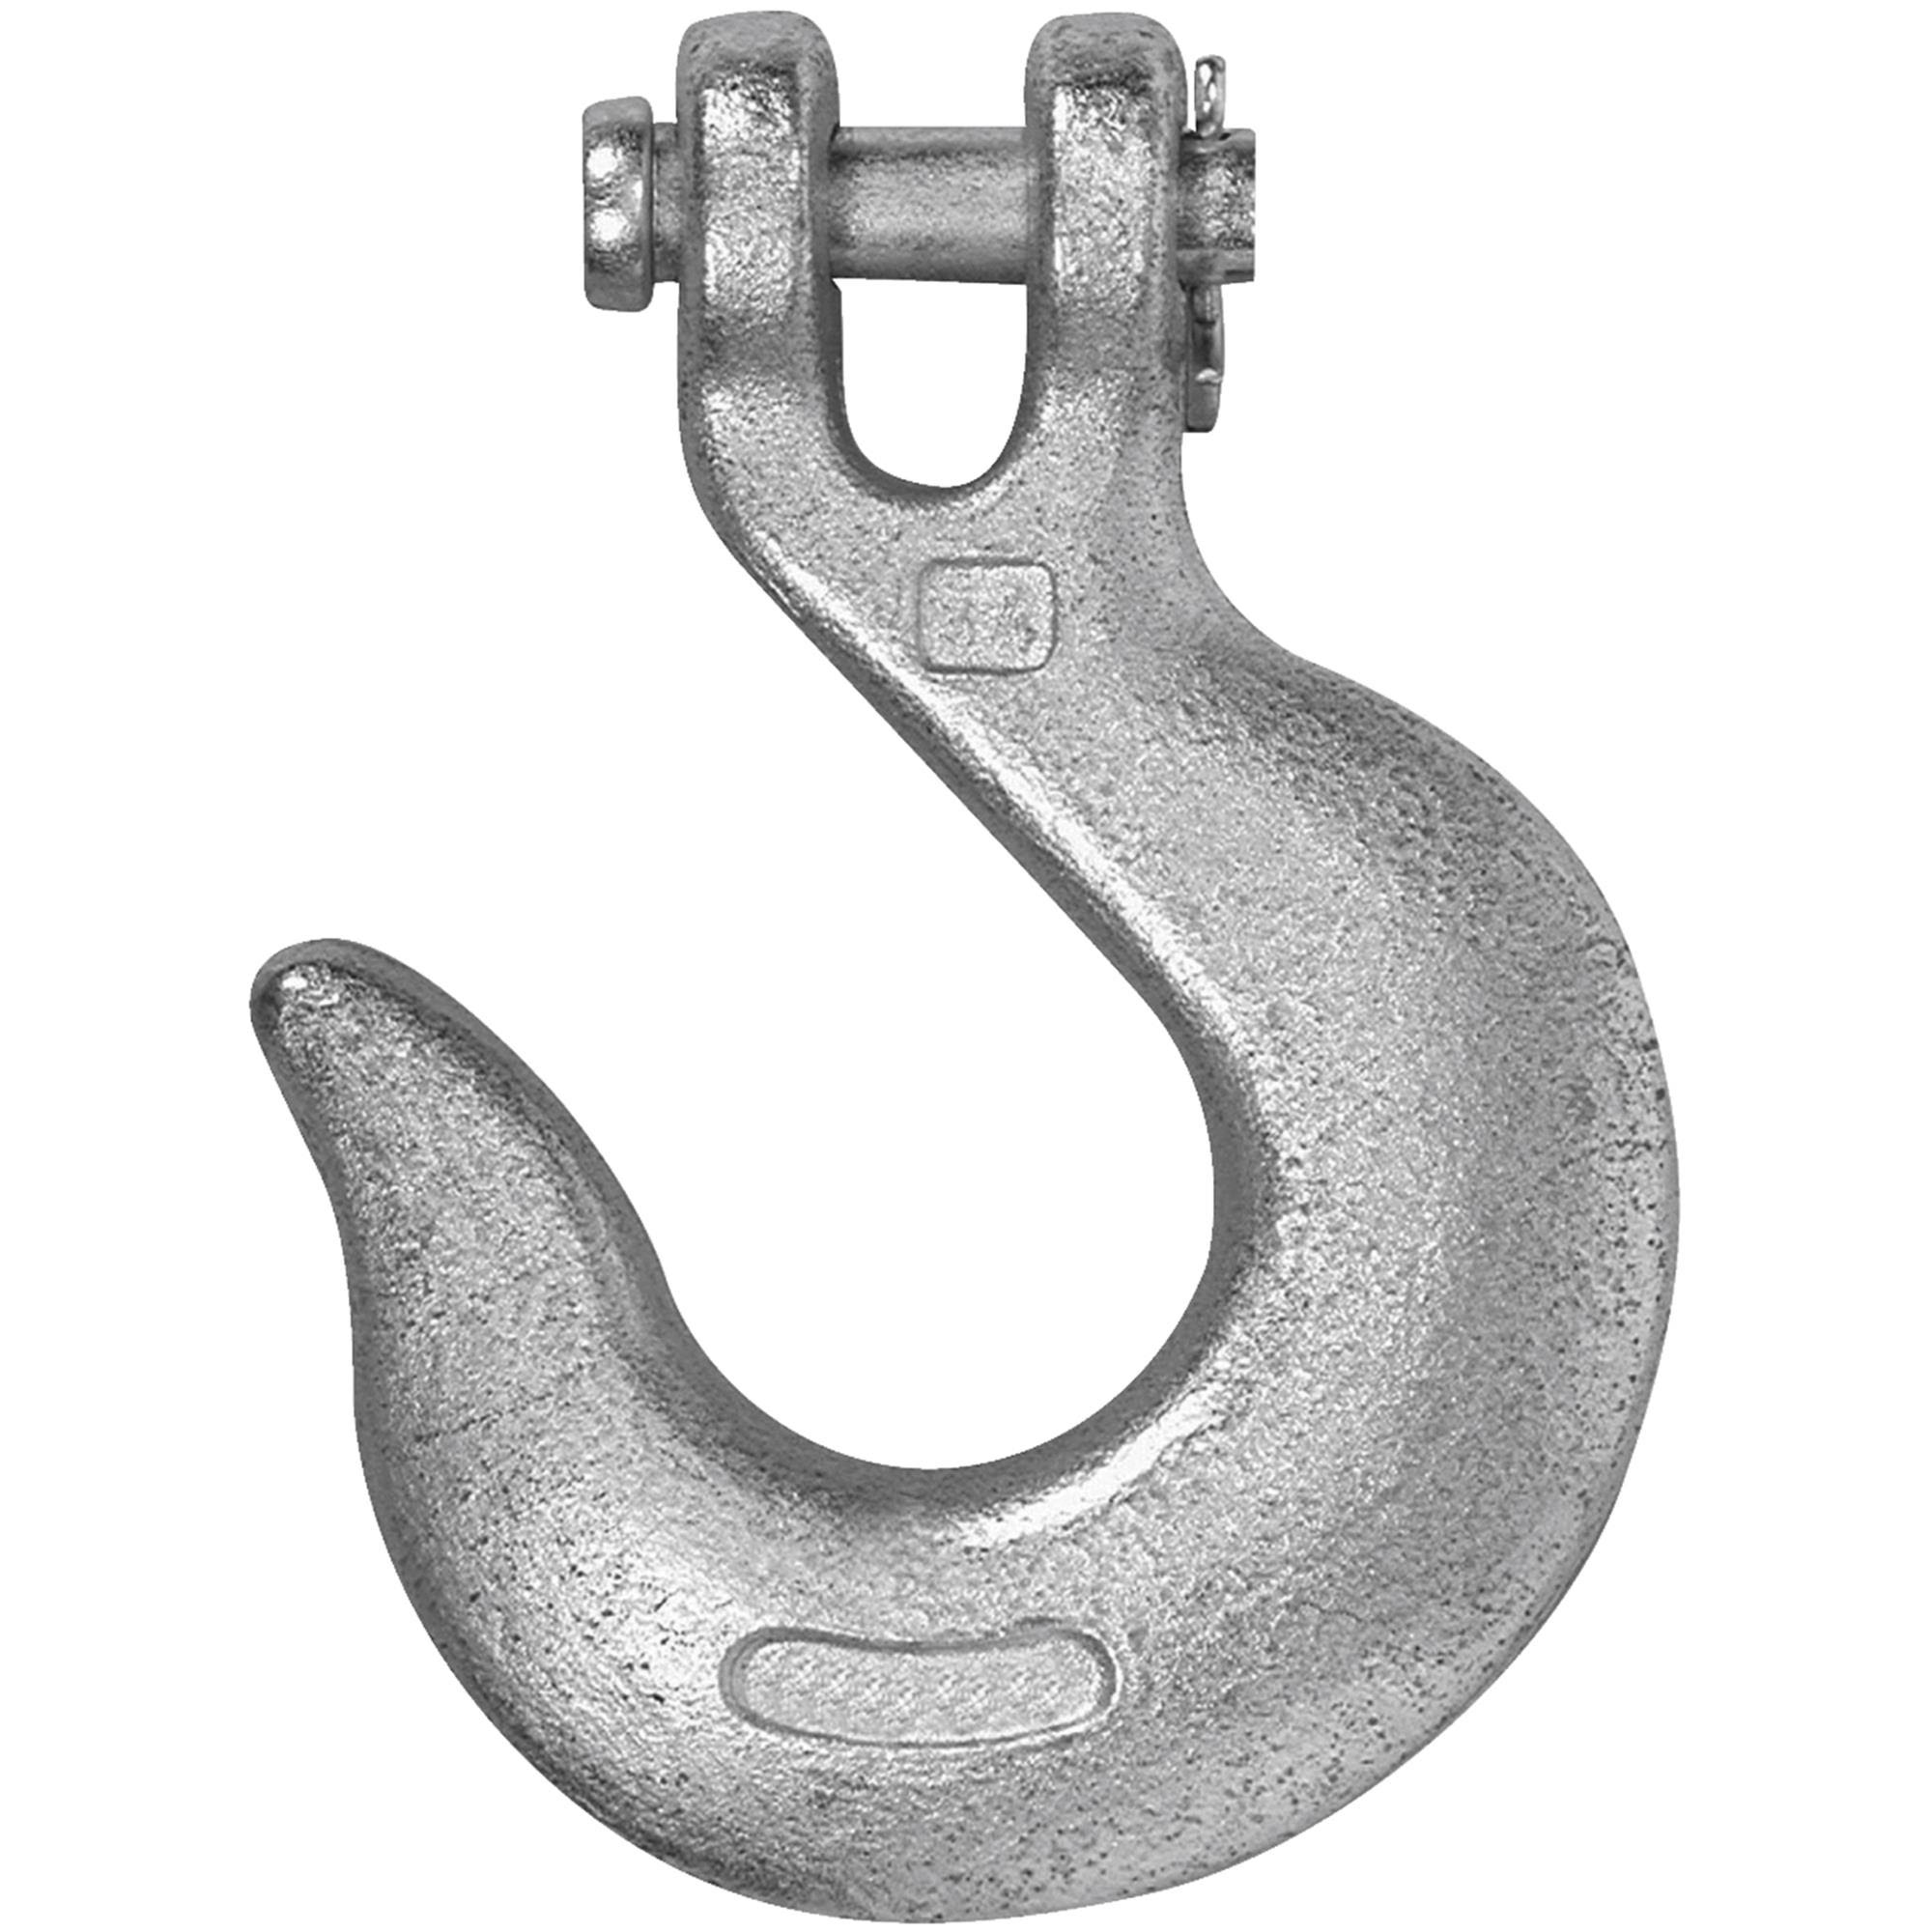 Apex Tool Group T9401524 Campbell Chain Clevis Slip Hook - Zinc Plated, 5/16"